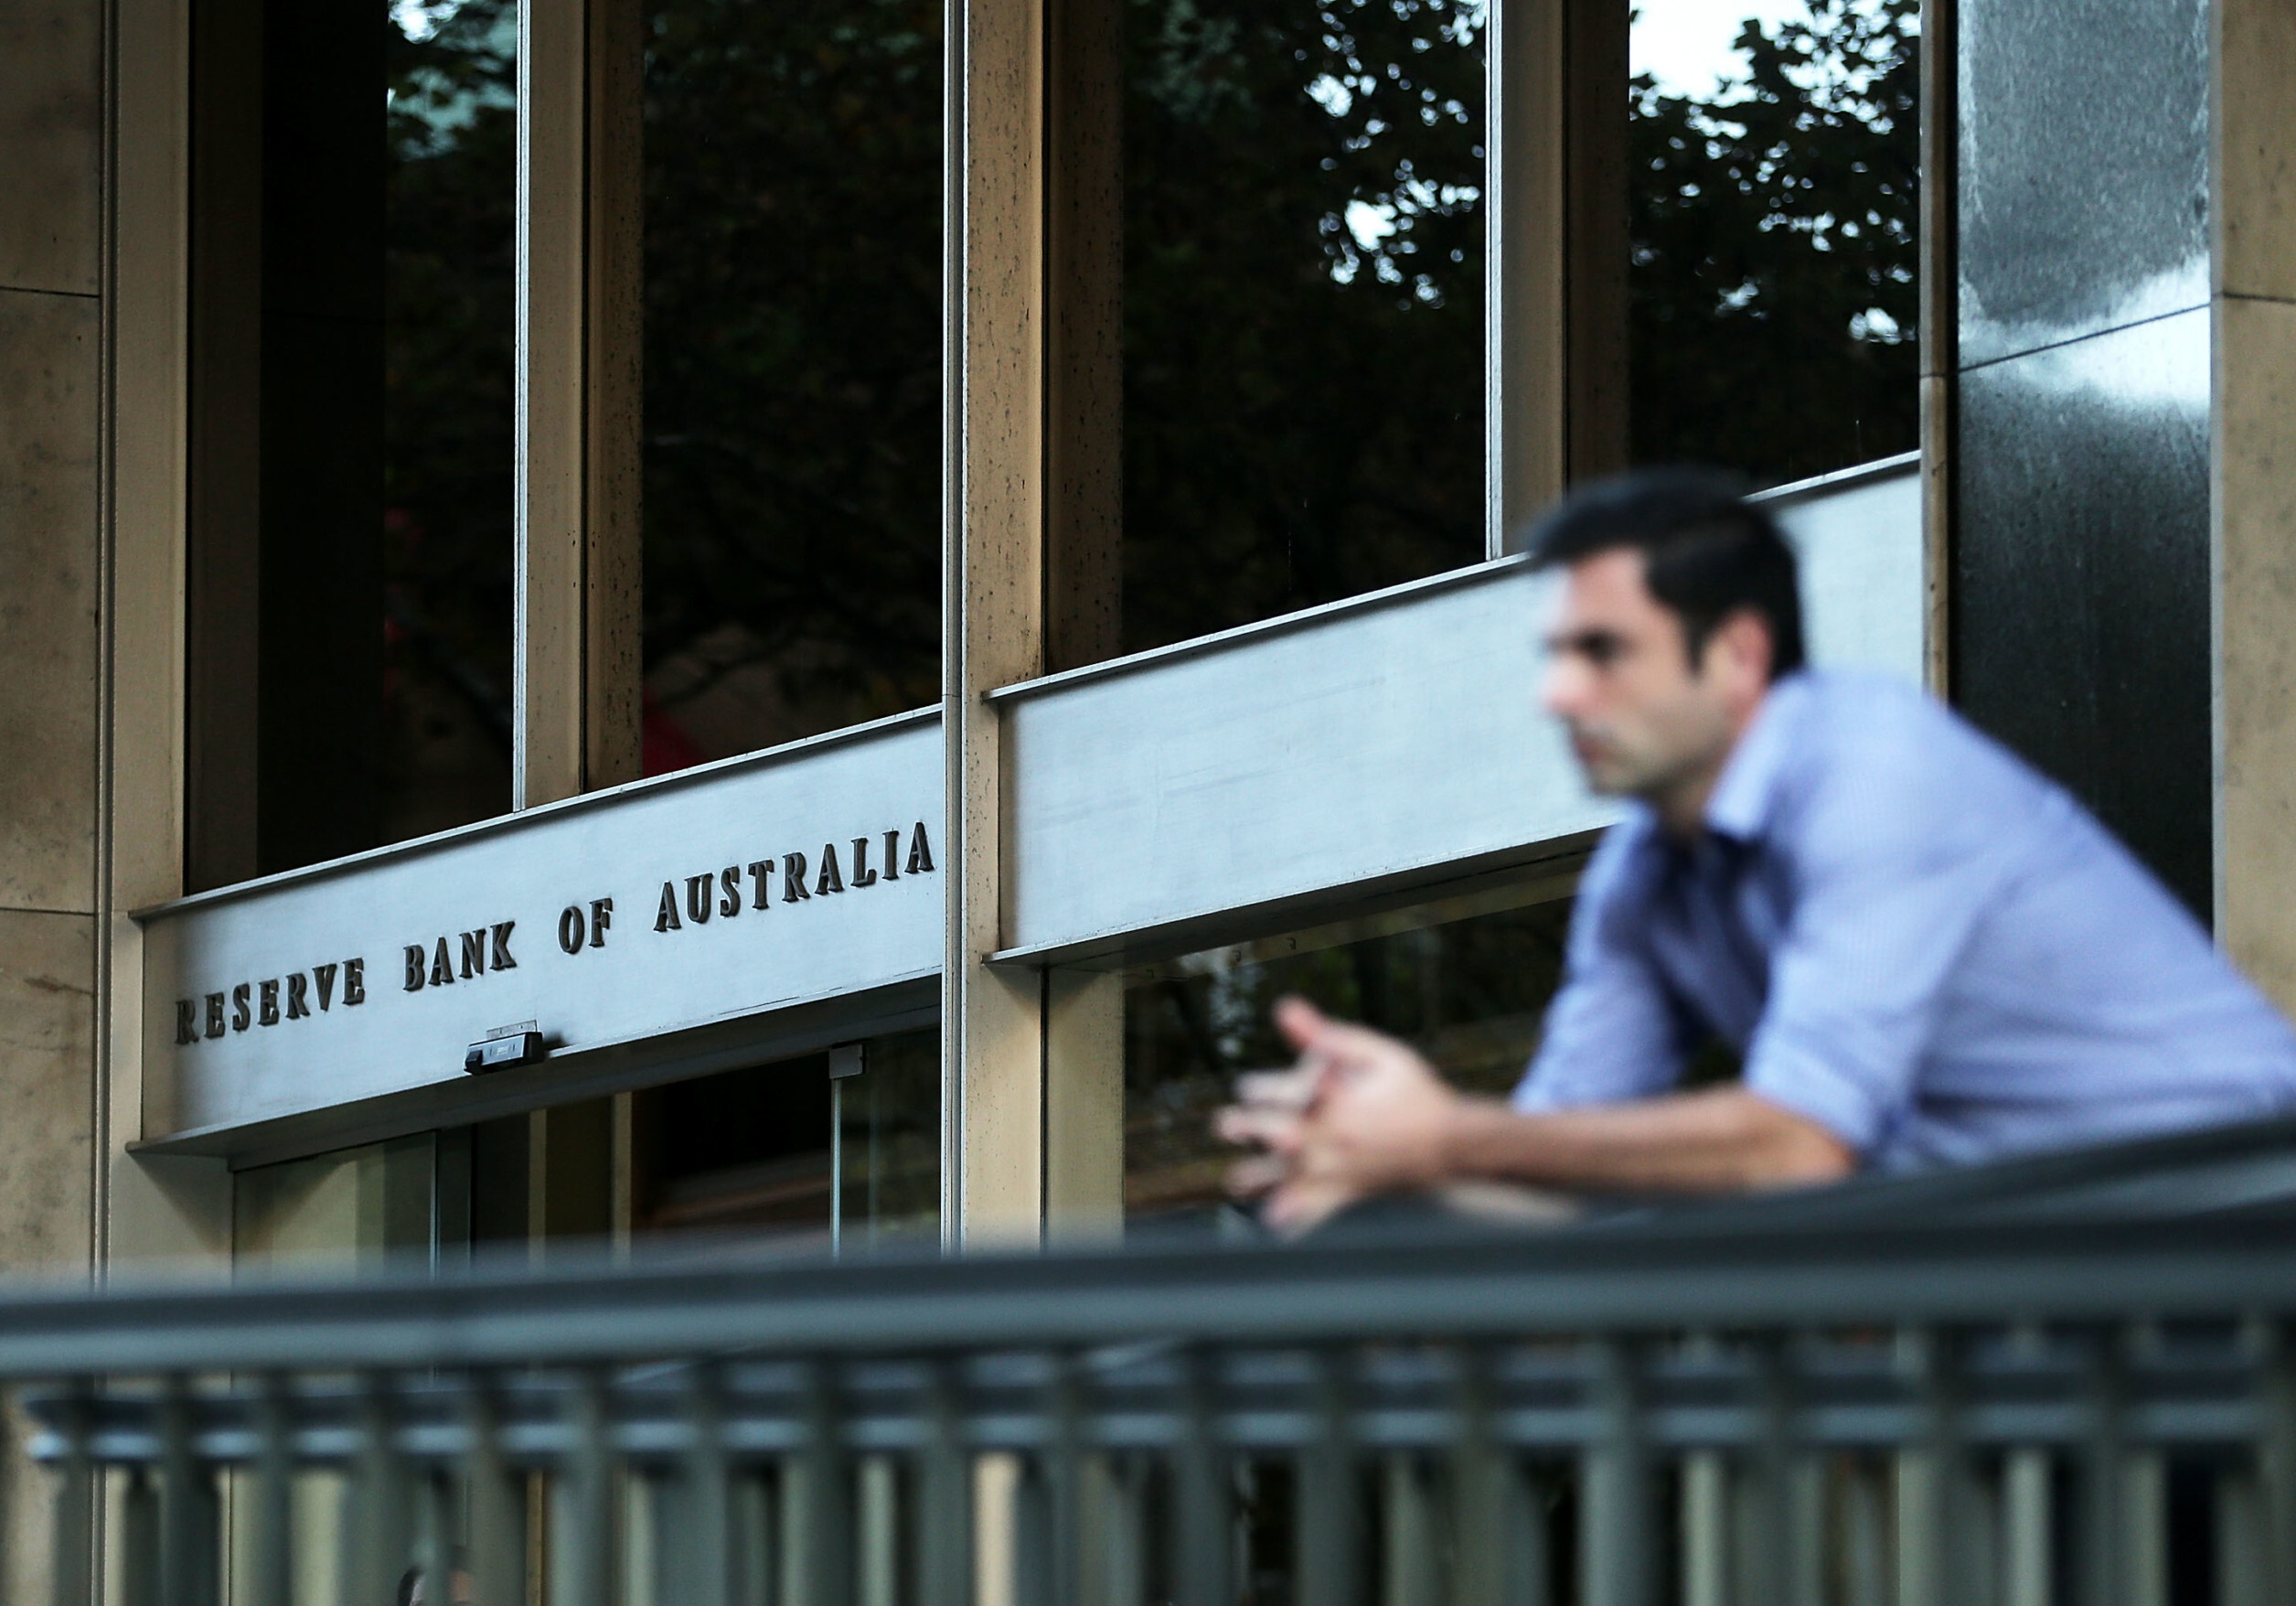 SYDNEY, AUSTRALIA - MAY 05:  A man looks on outside the Reserve Bank of Australia headquarters on May 5, 2015 in Sydney, Australia. Forecasters are predicting the Reserve Bank of Australia will cut interest rates for the second time this year in its upcoming May meeting. The cuts would come amidst fear of stoking the rising prices of housing in Australia.  (Photo by Mark Metcalfe/Getty Images)